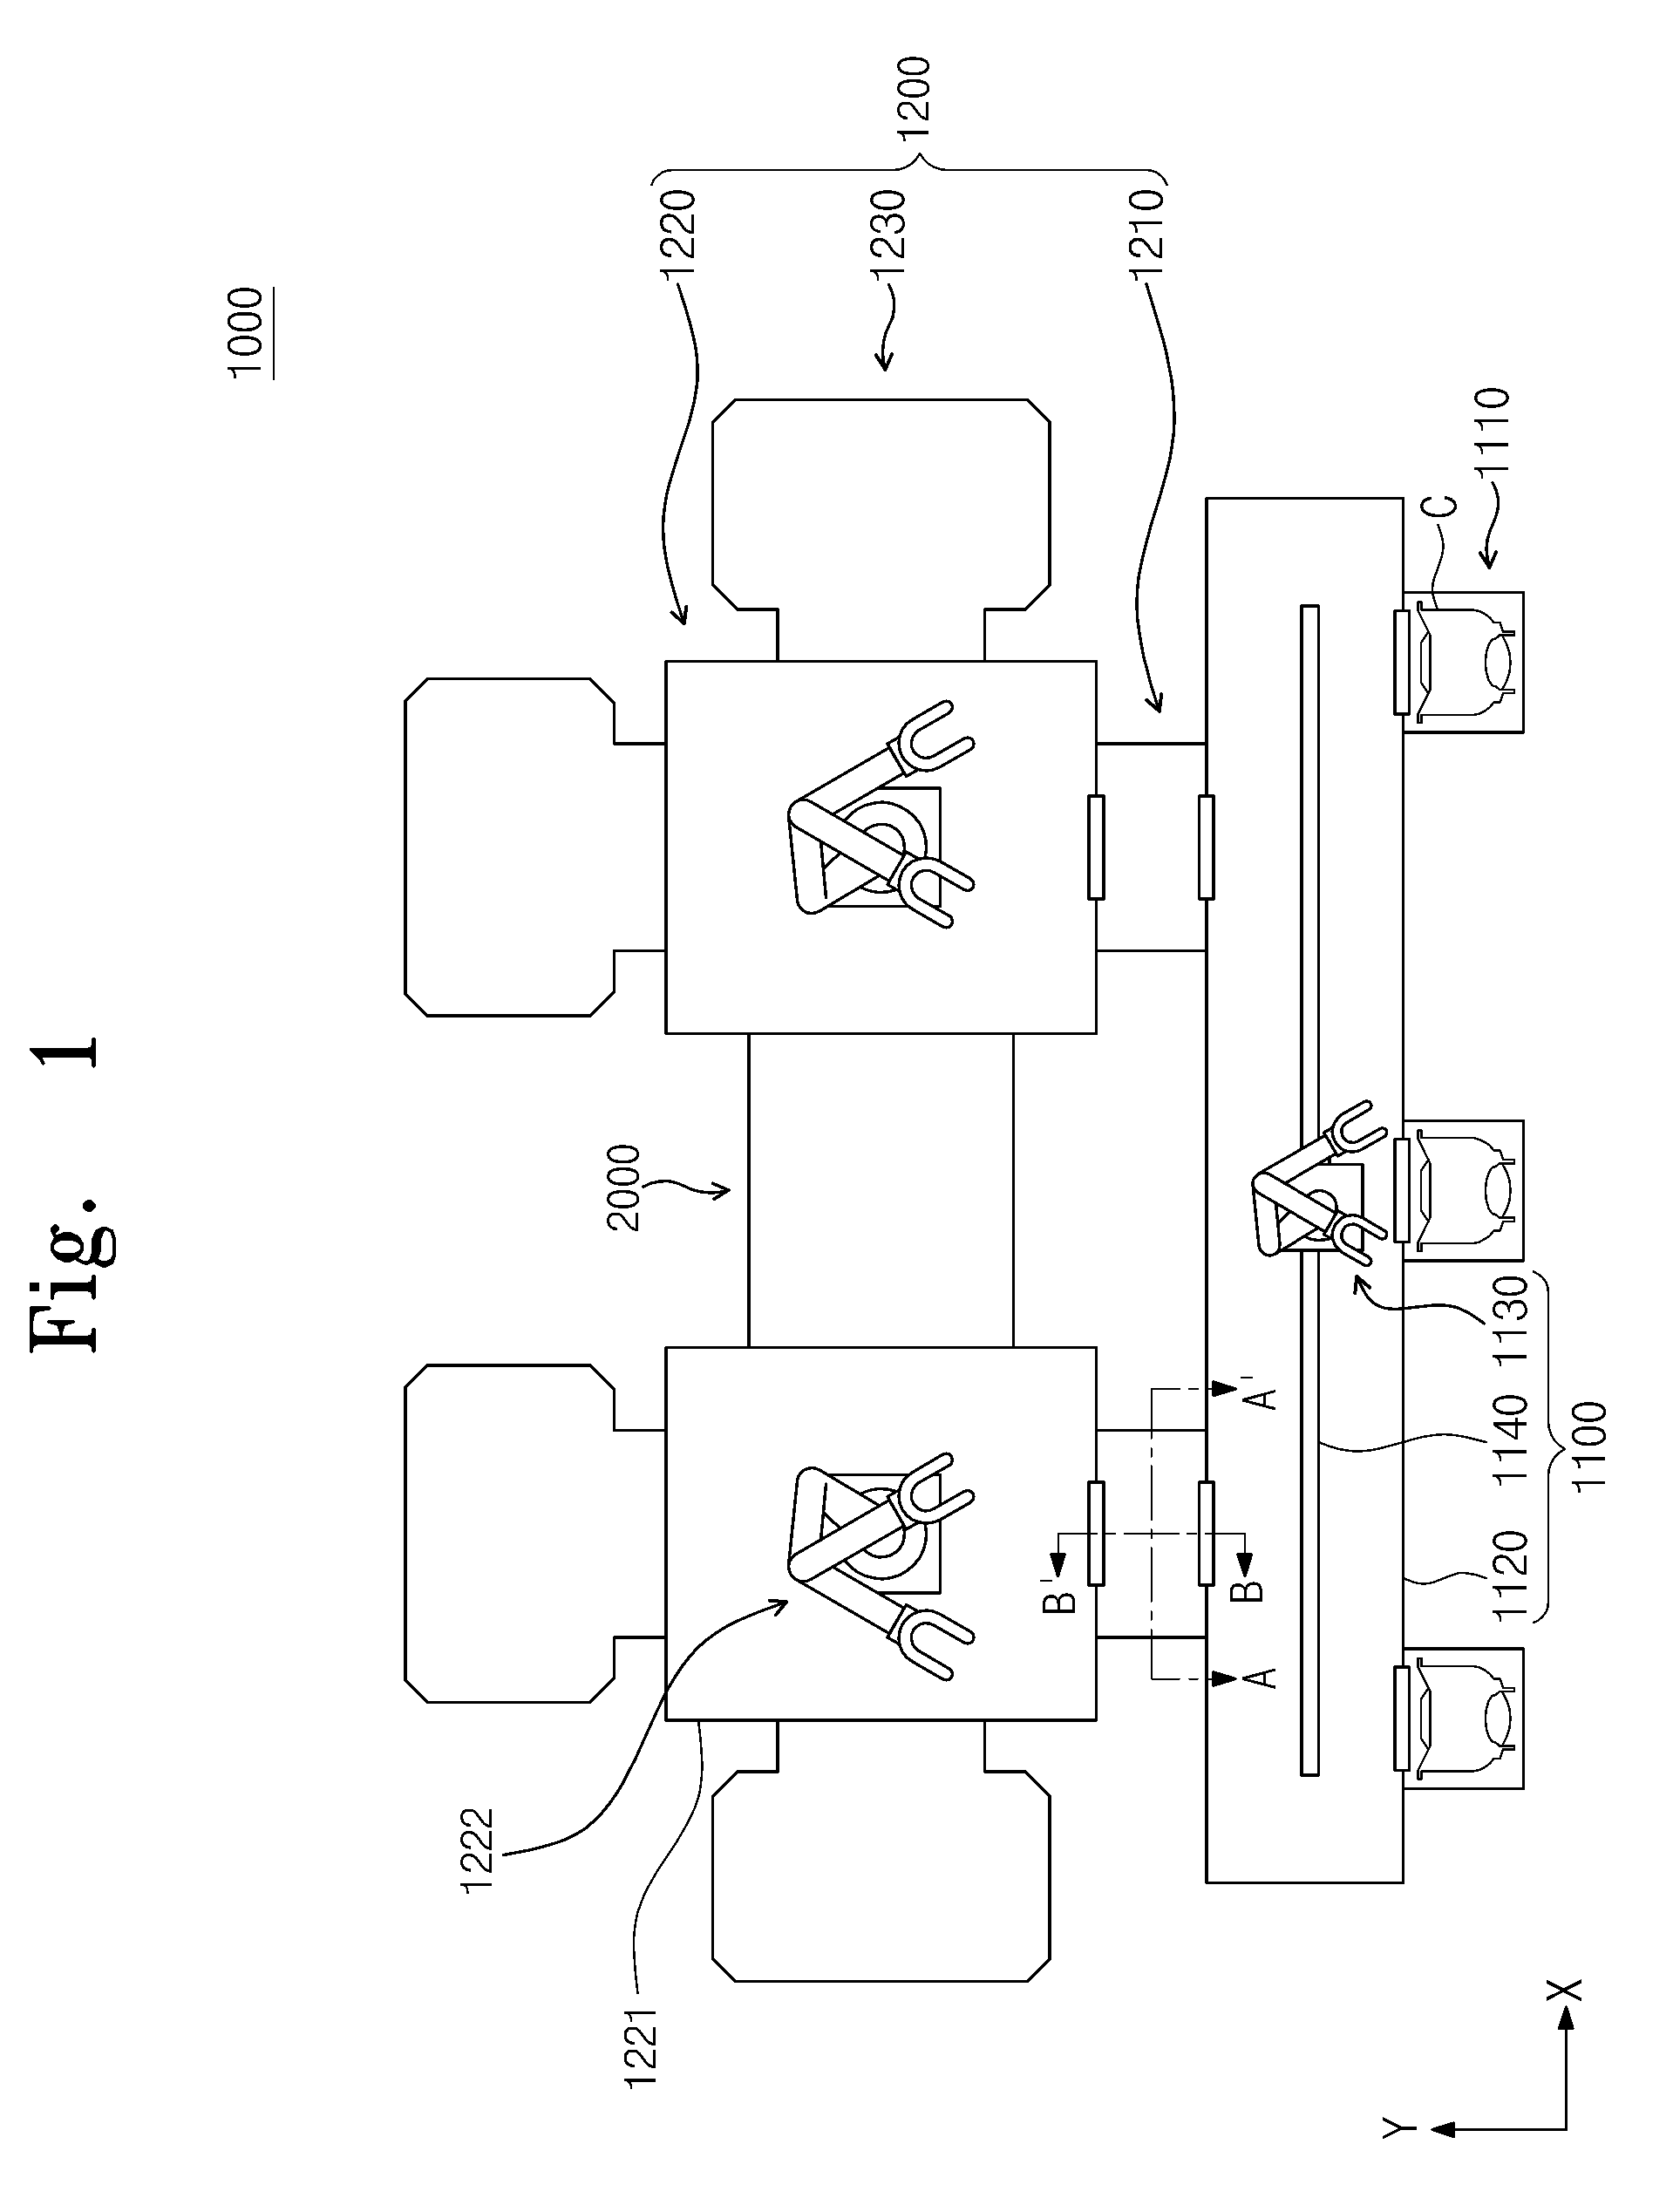 Apparatuses, systems and methods for treating substrate